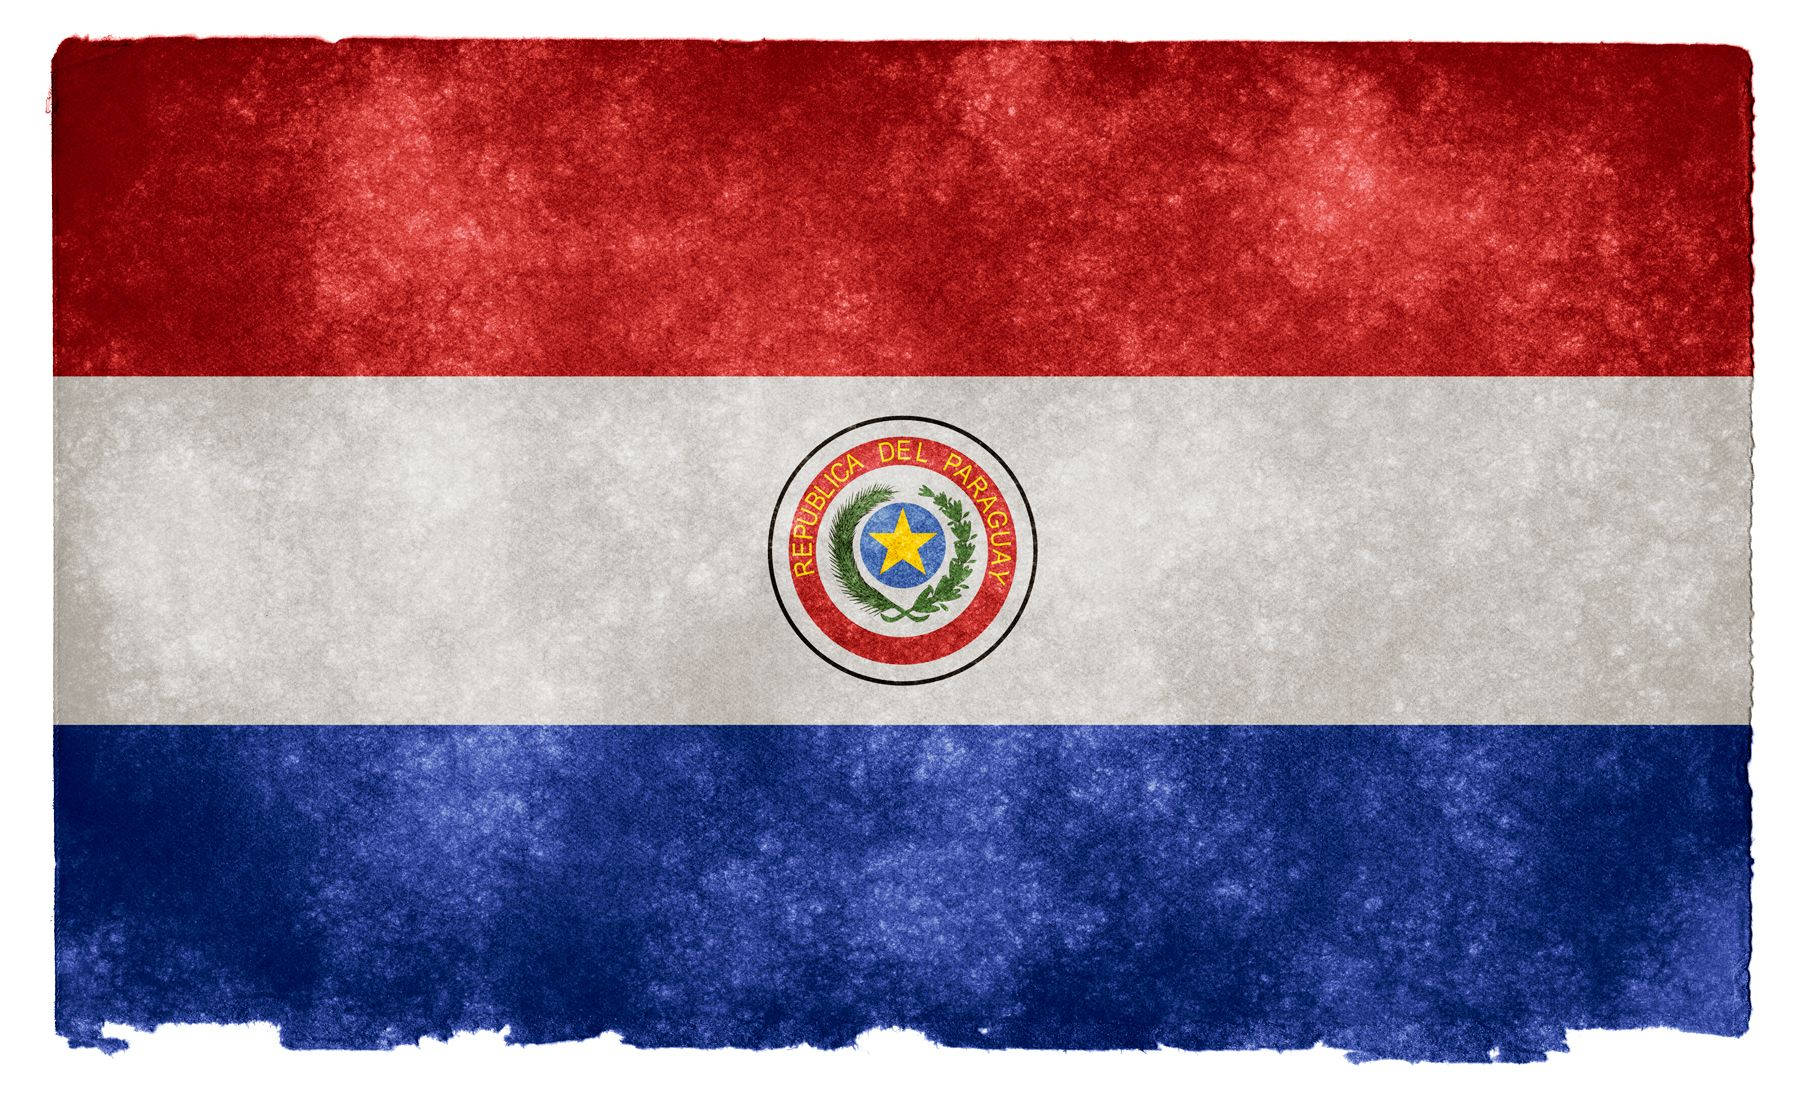 Proud Display Of Paraguay's Flag Background